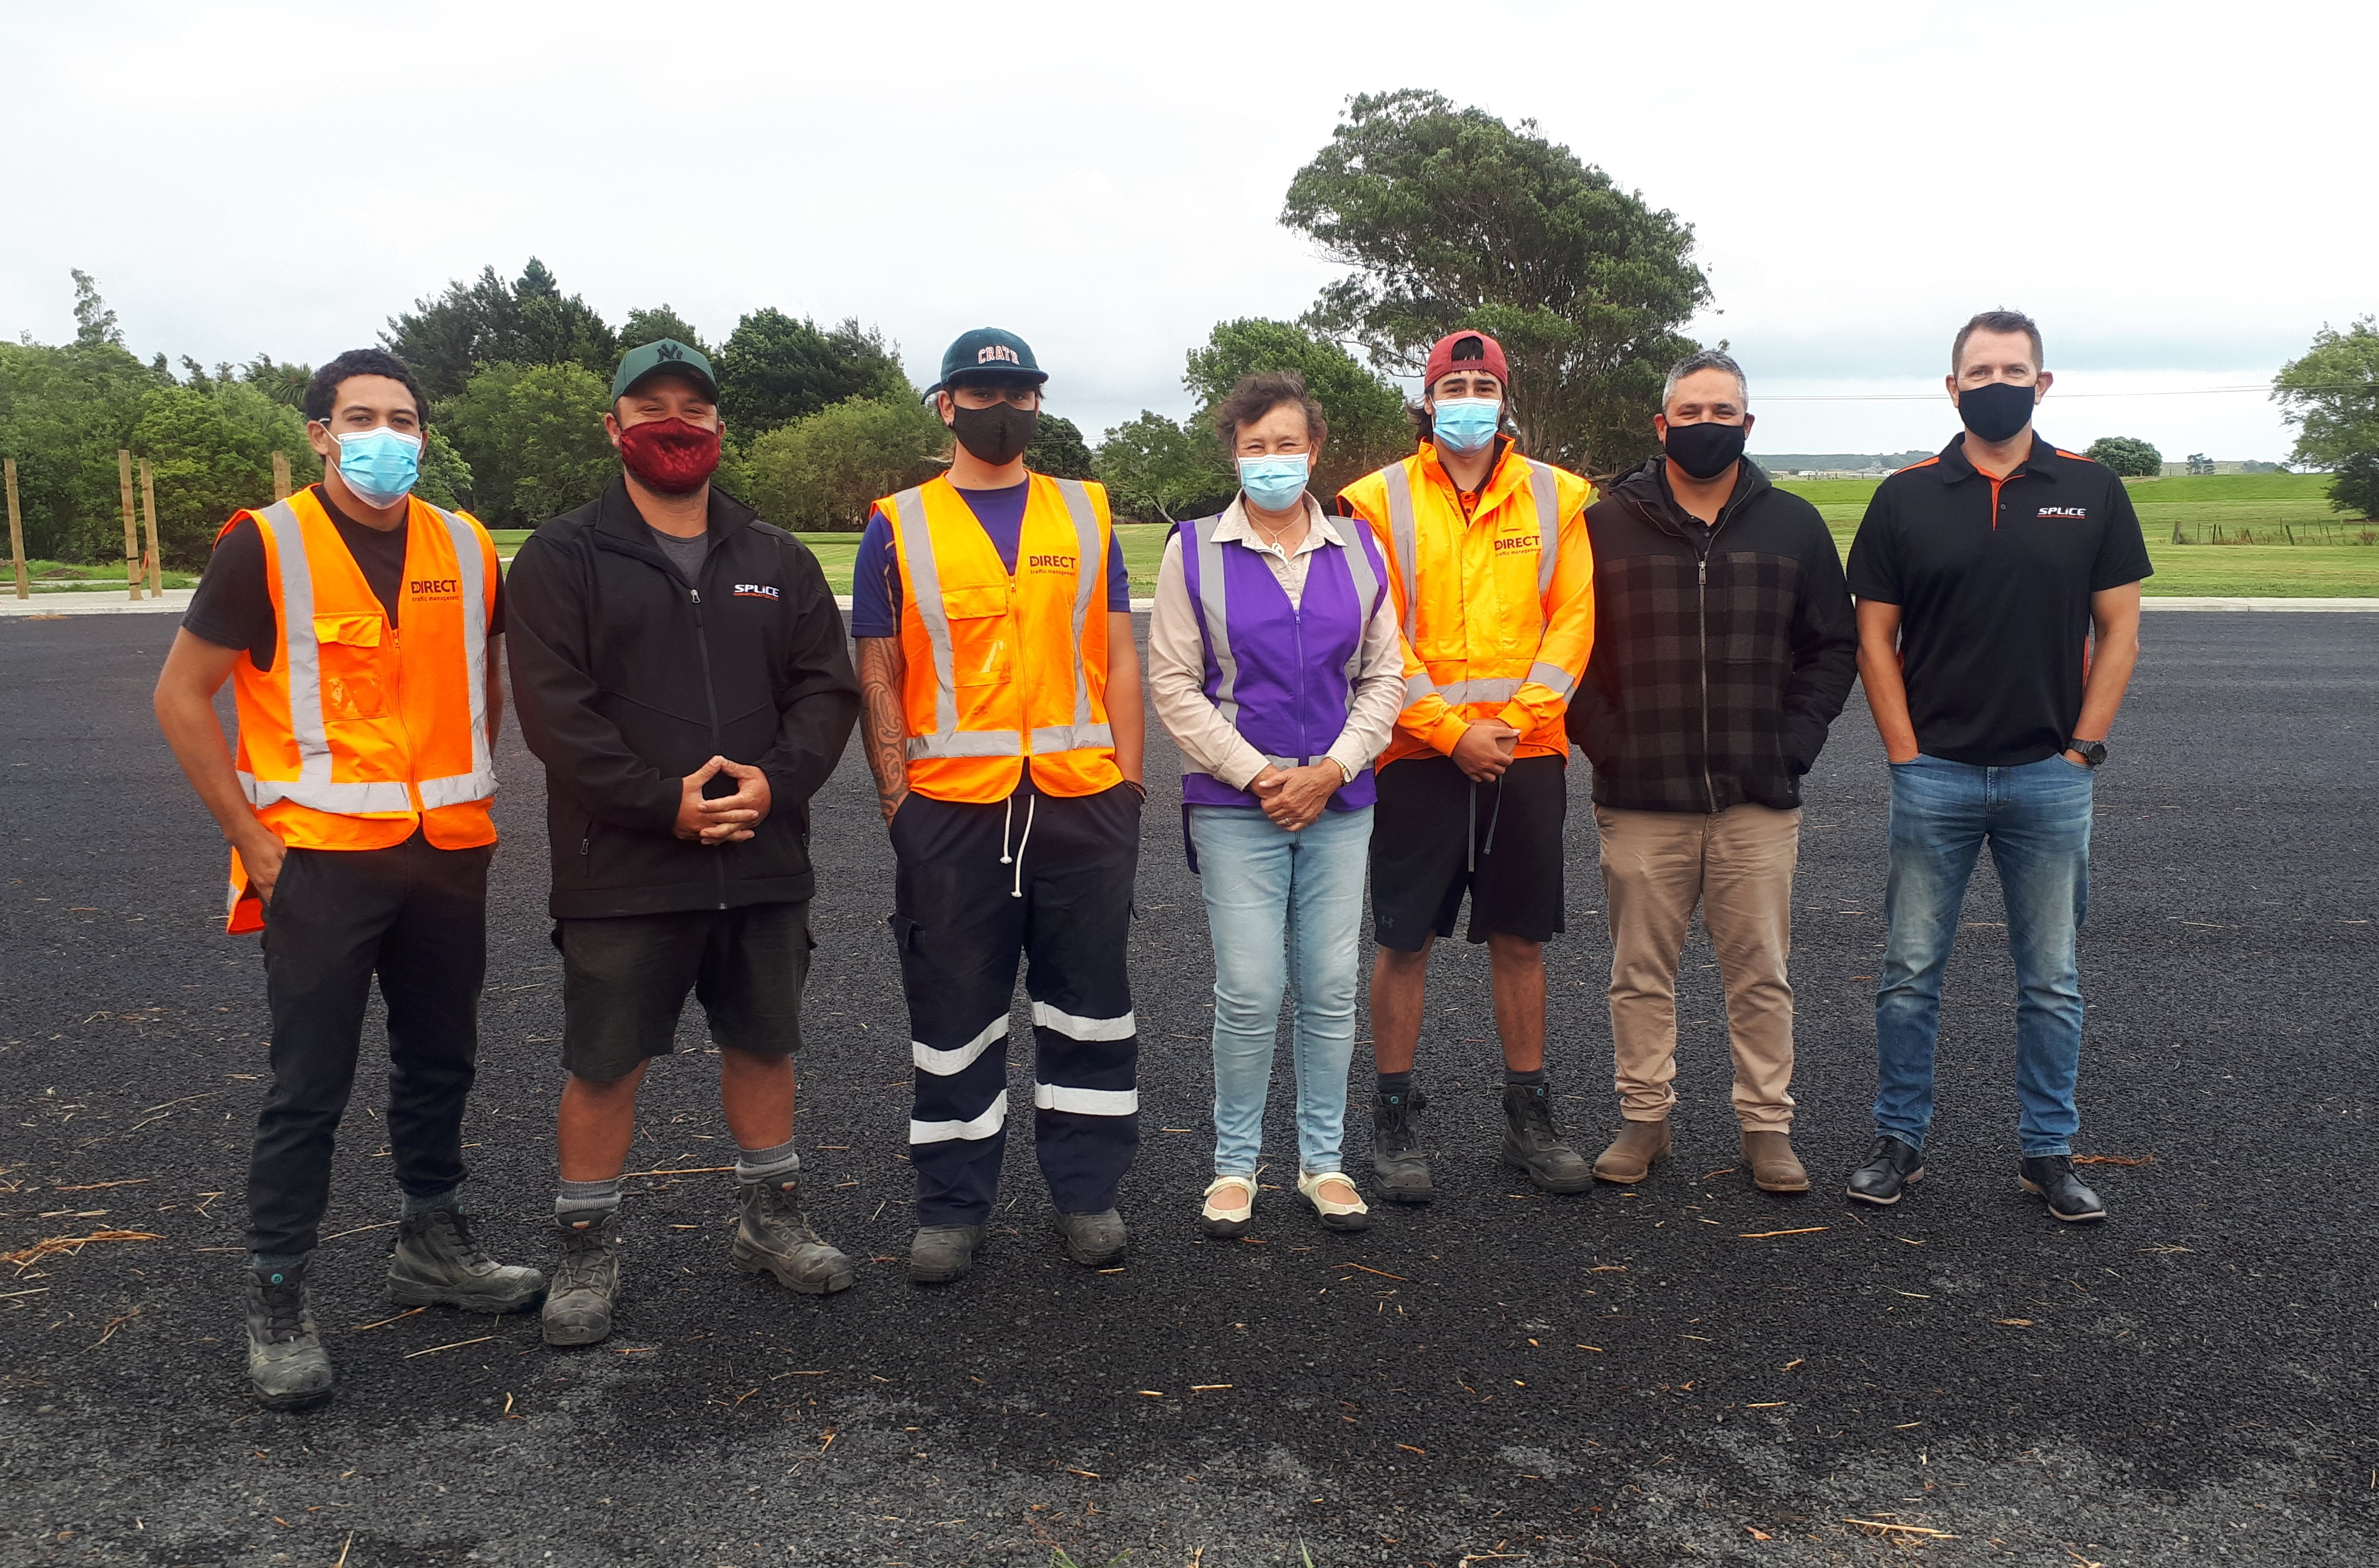 Mayor Lyn Reisterer with Mayors' Taskforce for Jobs subsidy recipients Vhance, Darrian, and Te Huaki, as well as their supervisors, on the brand new parking lot they helped make